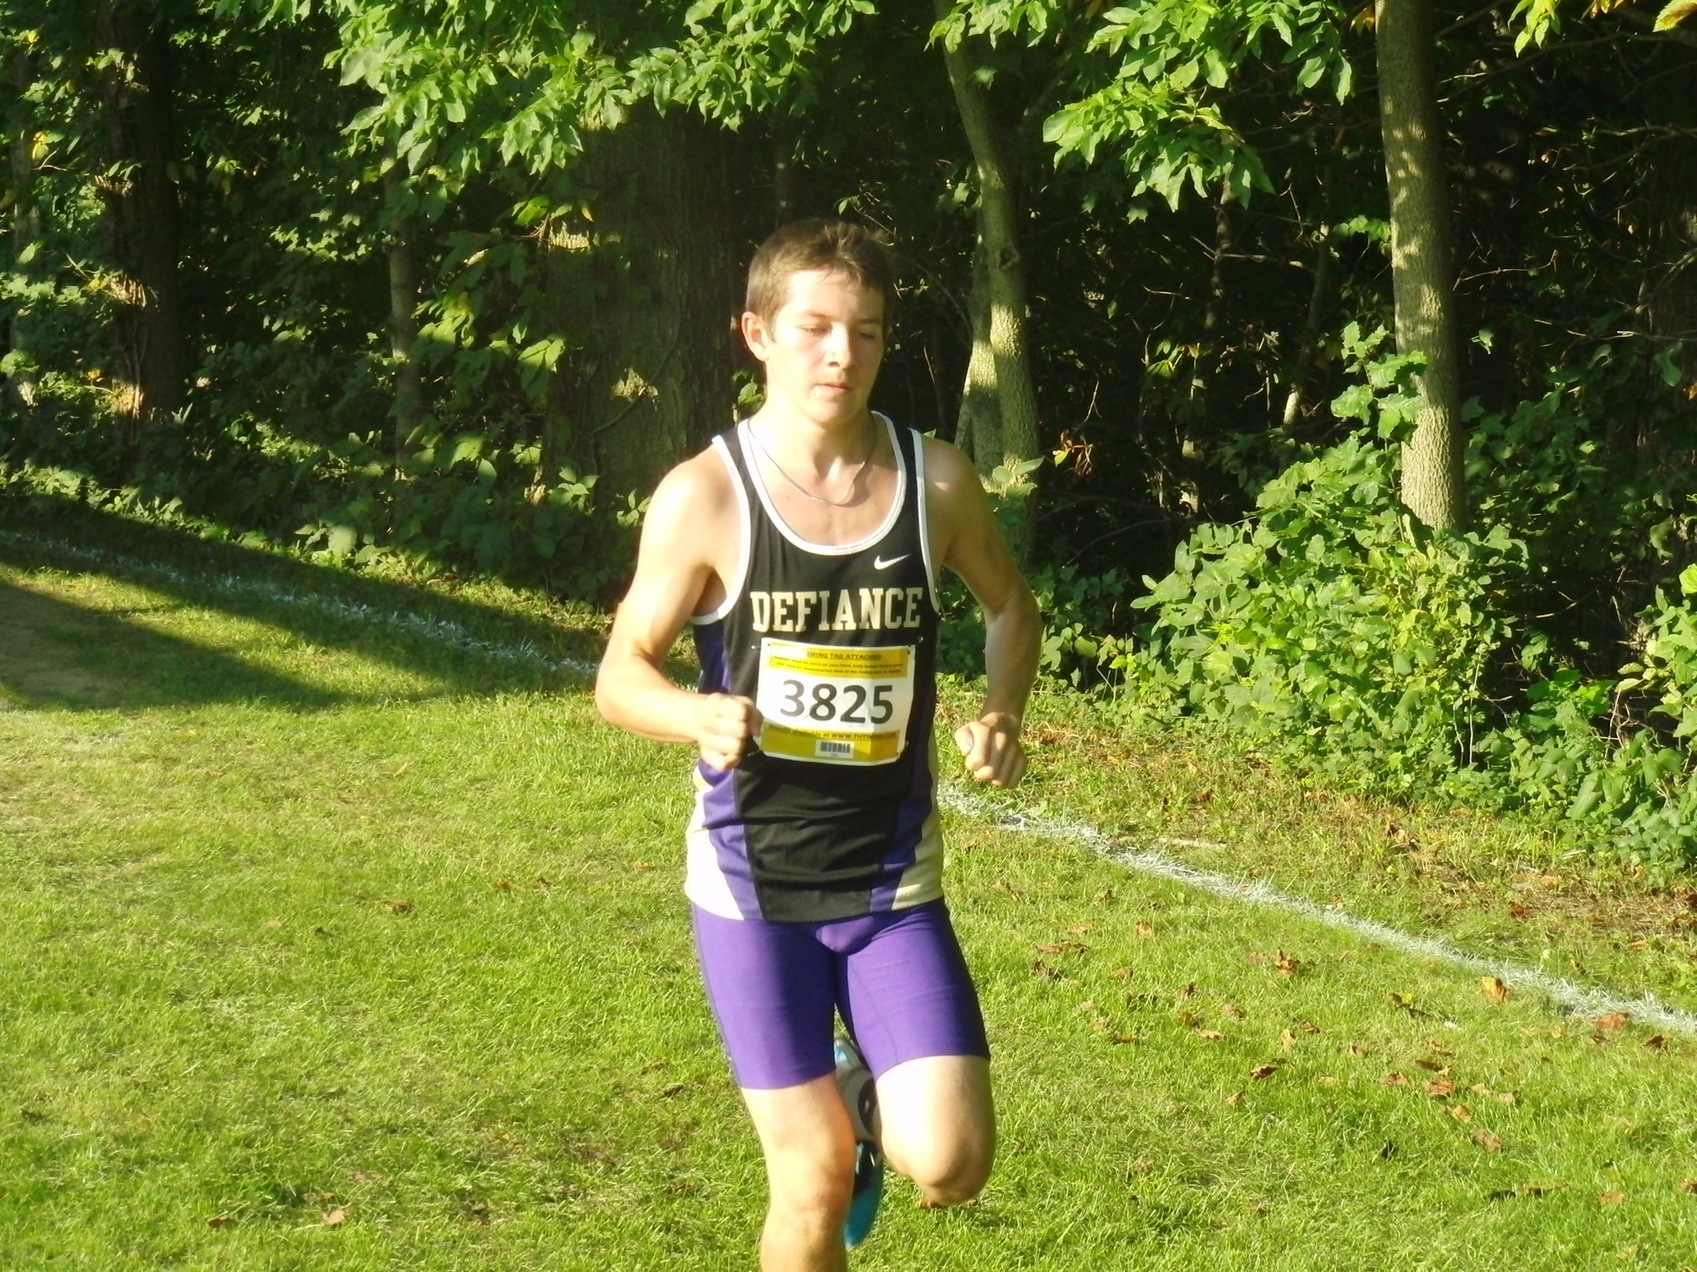 Men's Cross Country Competes at the Penn State Behrend Meet